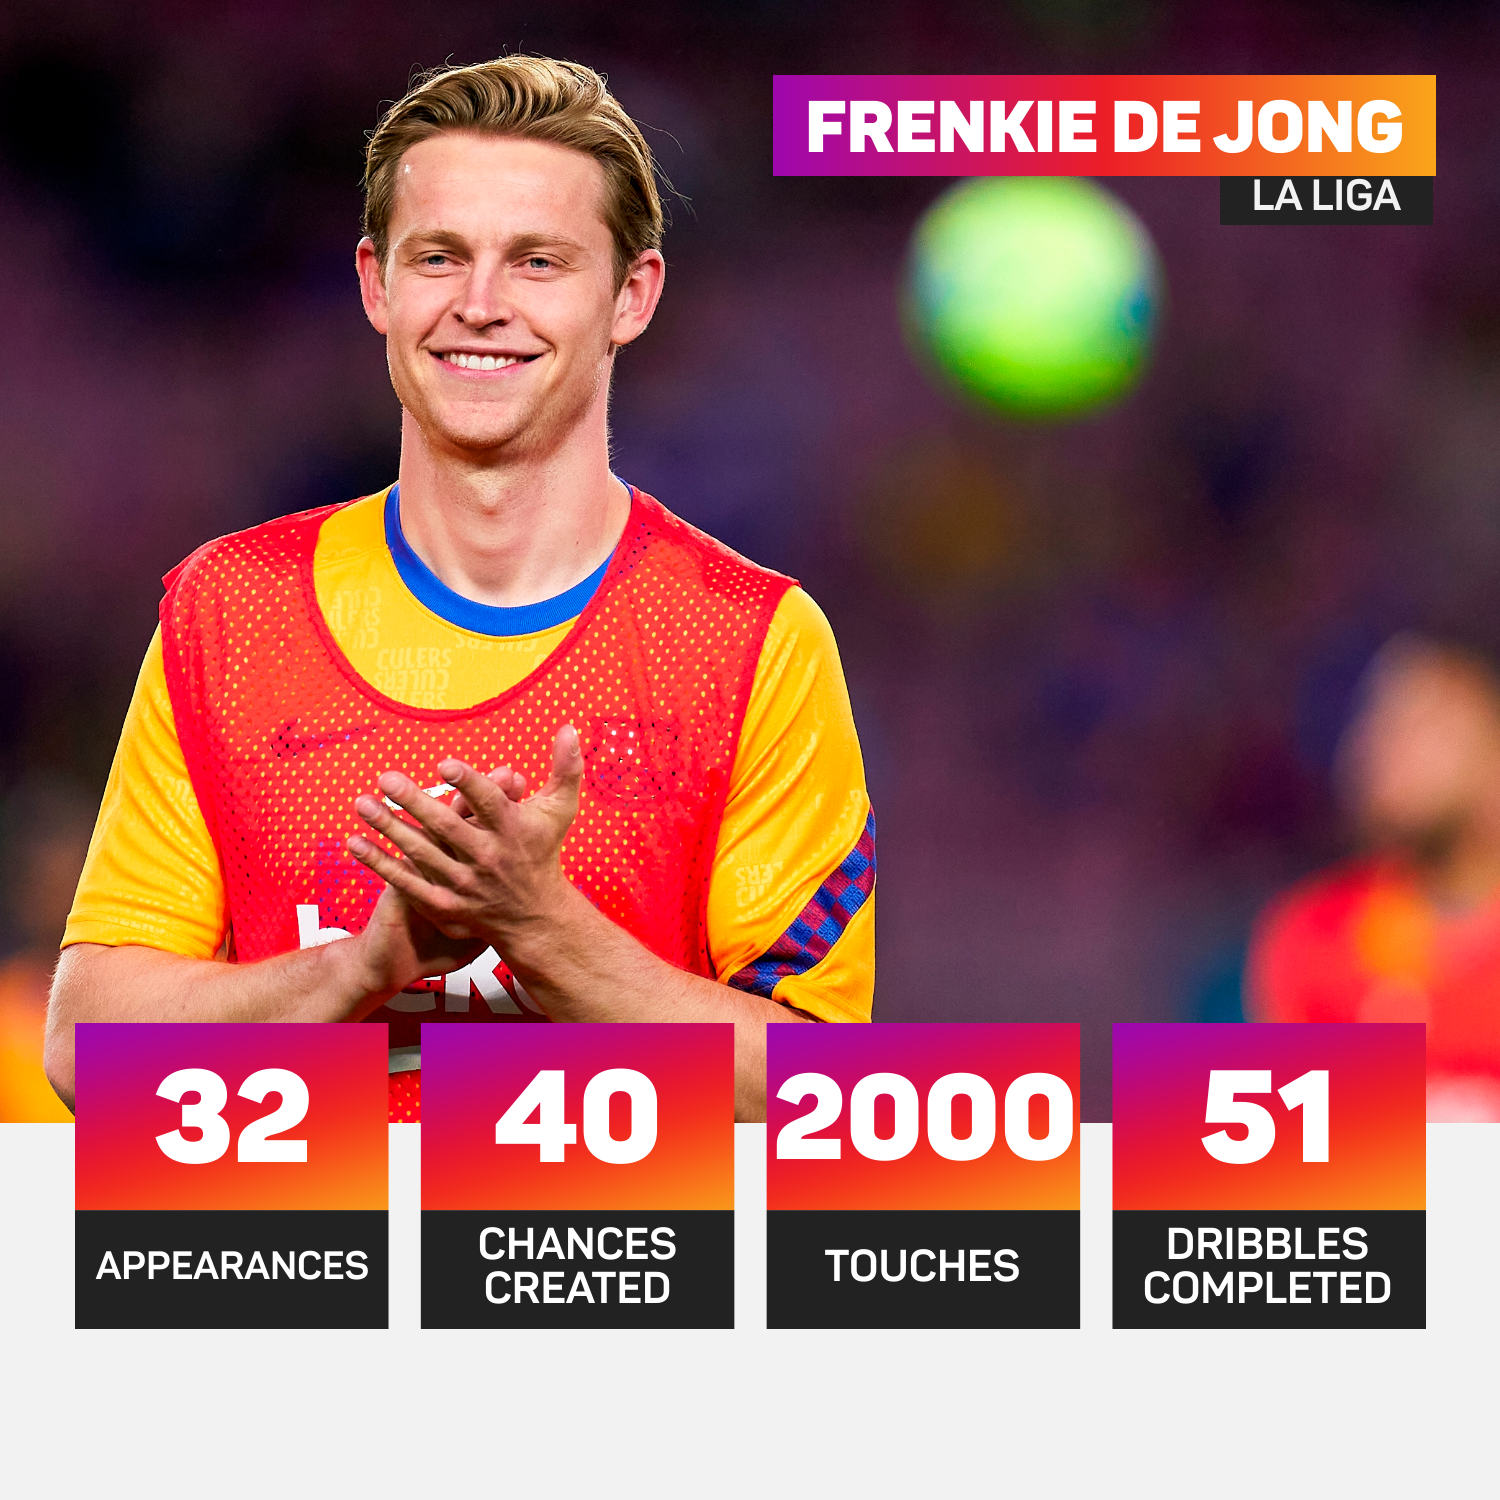 De Jong brings skill and composure on the ball